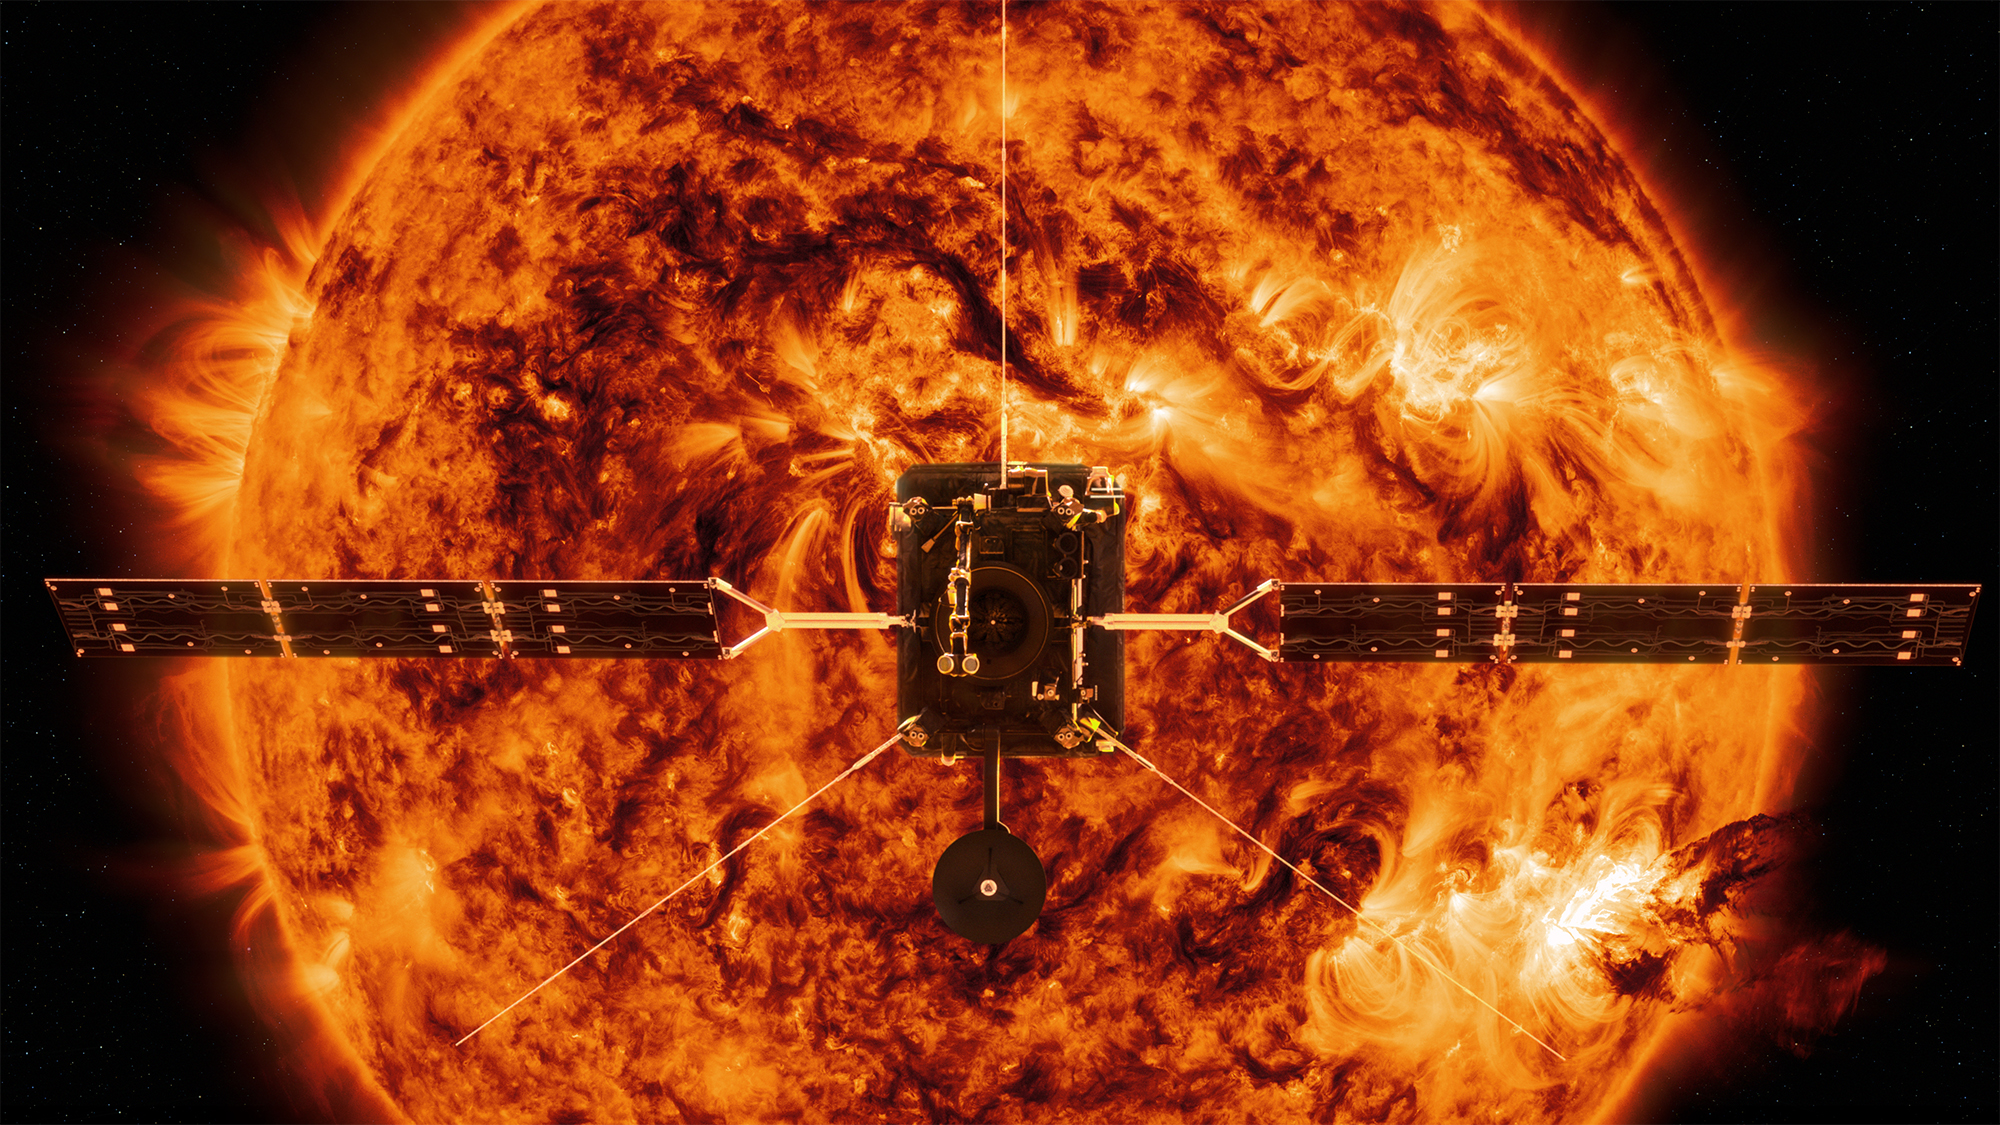 ESA’s (European Space Agency’s) Solar Orbiter, shown here in an artist’s rendition illustration against backdrop image of Sun